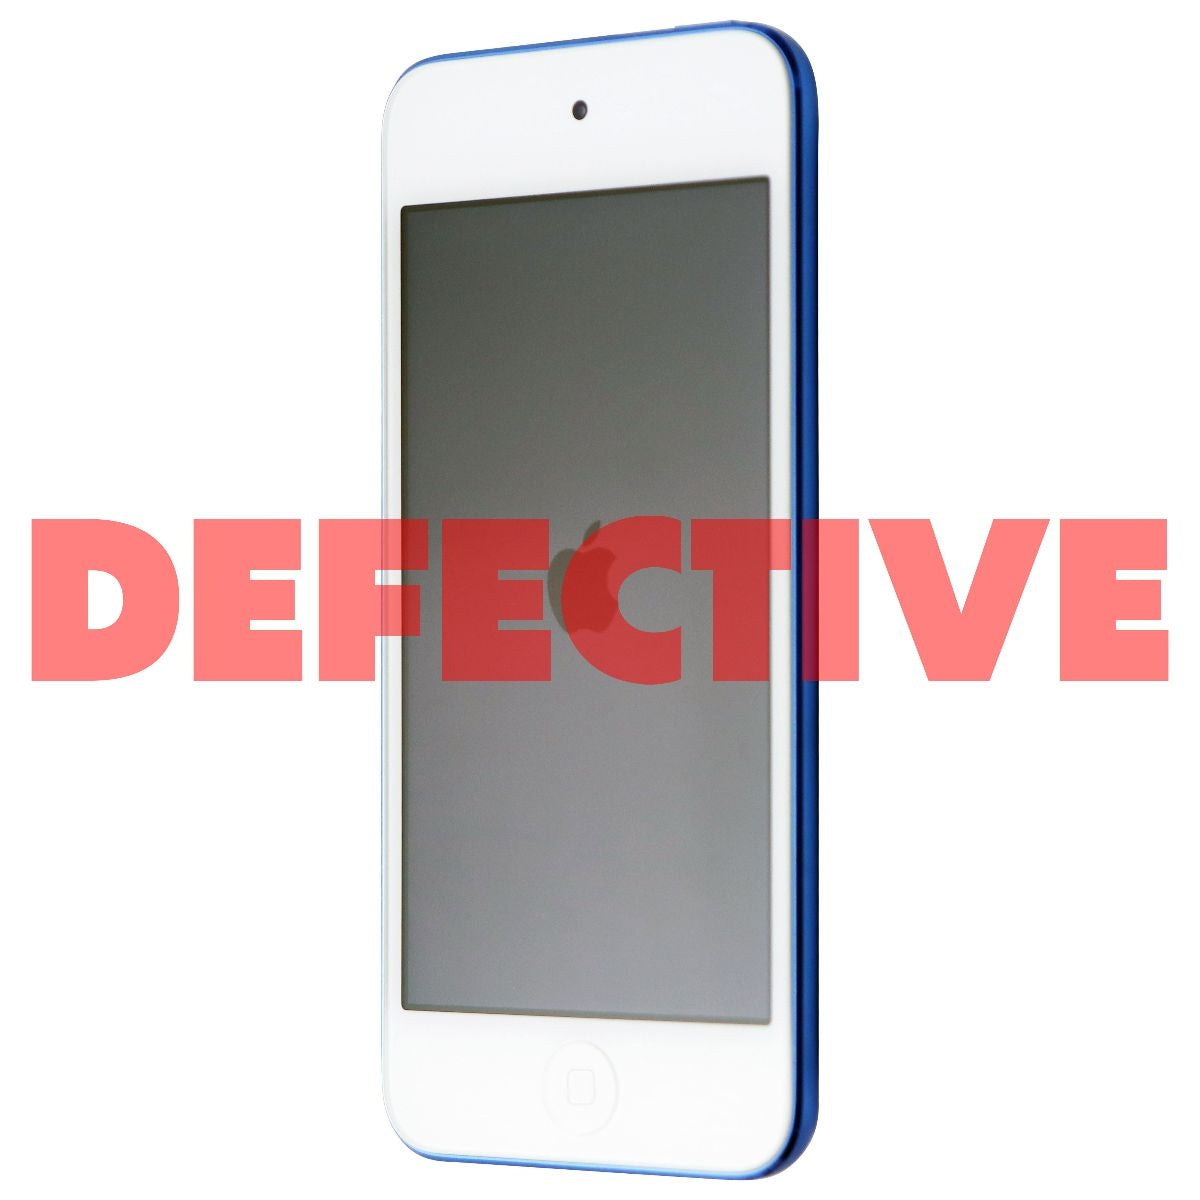 Apple iPod Touch 7th Generation (32GB) - Blue (A2178 / MVHU2LL/A) Portable Audio - iPods & MP3 Players Apple    - Simple Cell Bulk Wholesale Pricing - USA Seller